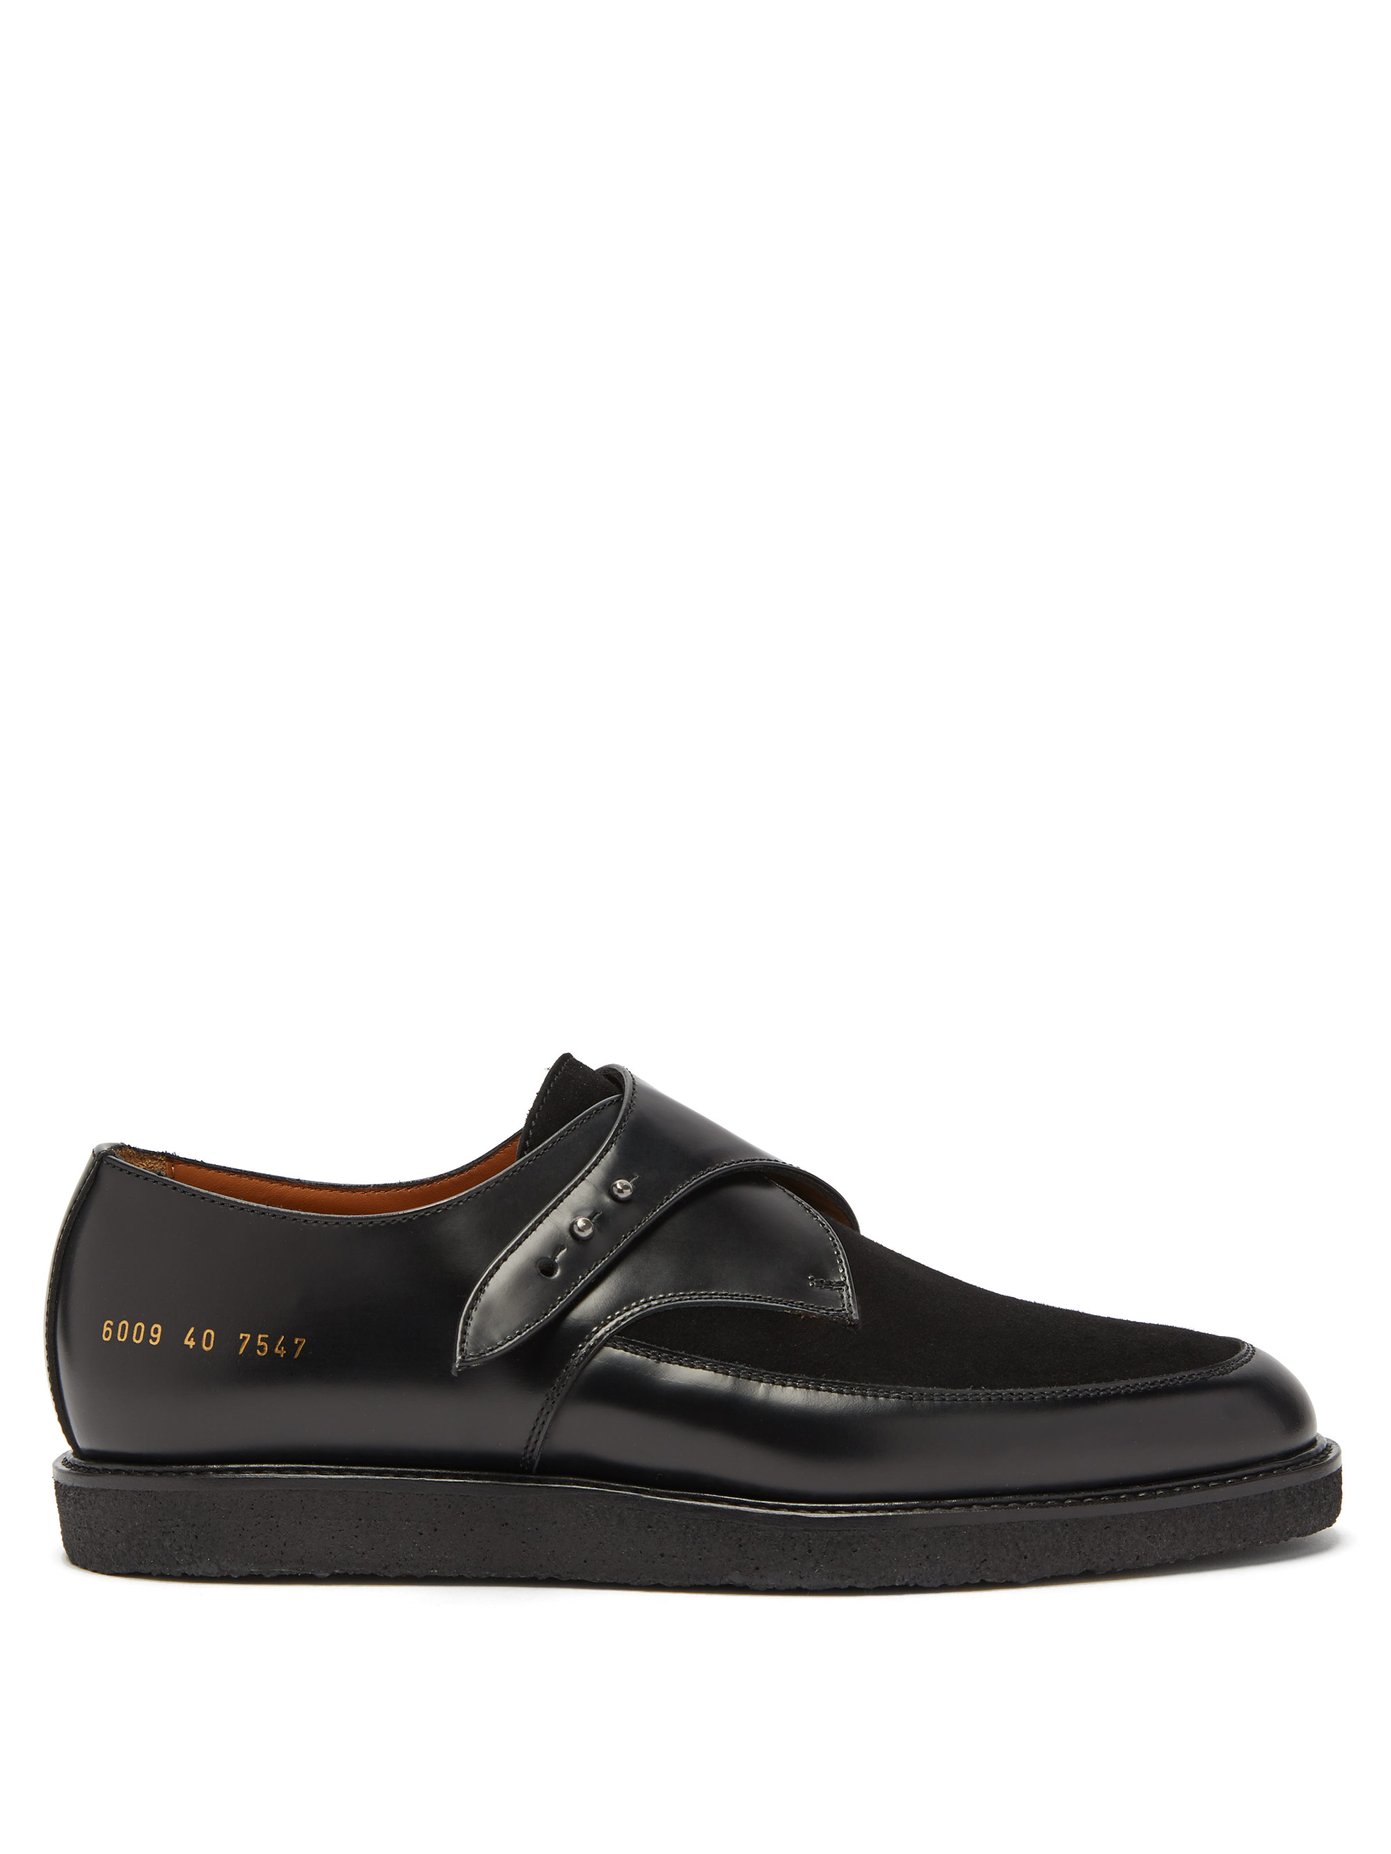 monk strap creepers